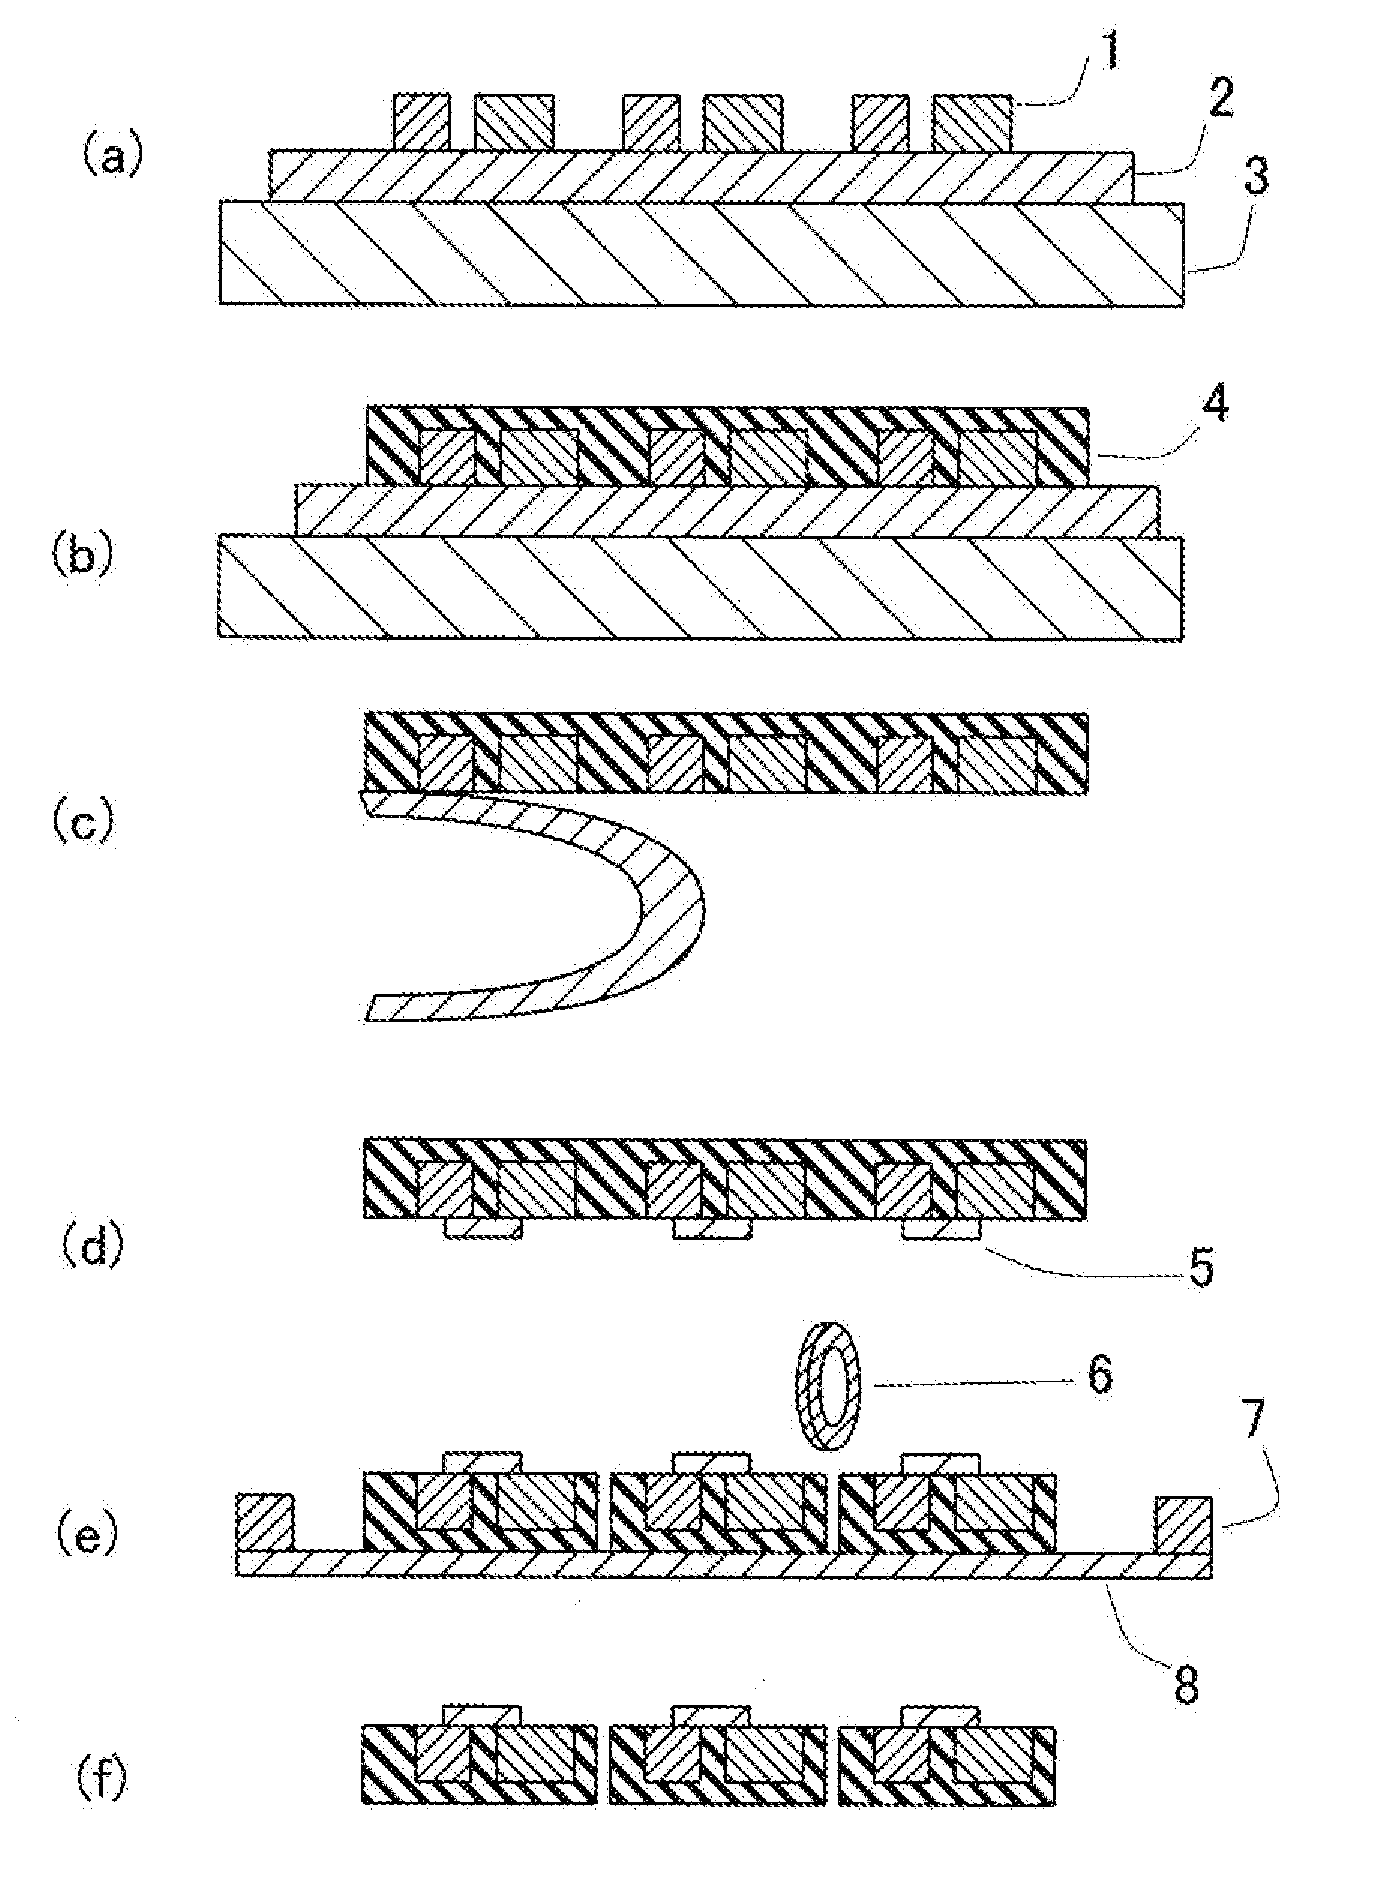 Heat-resistant adhesive sheet for substrateless semiconductor package fabrication and method for fabricating substrateless semiconductor package using the adhesive sheet